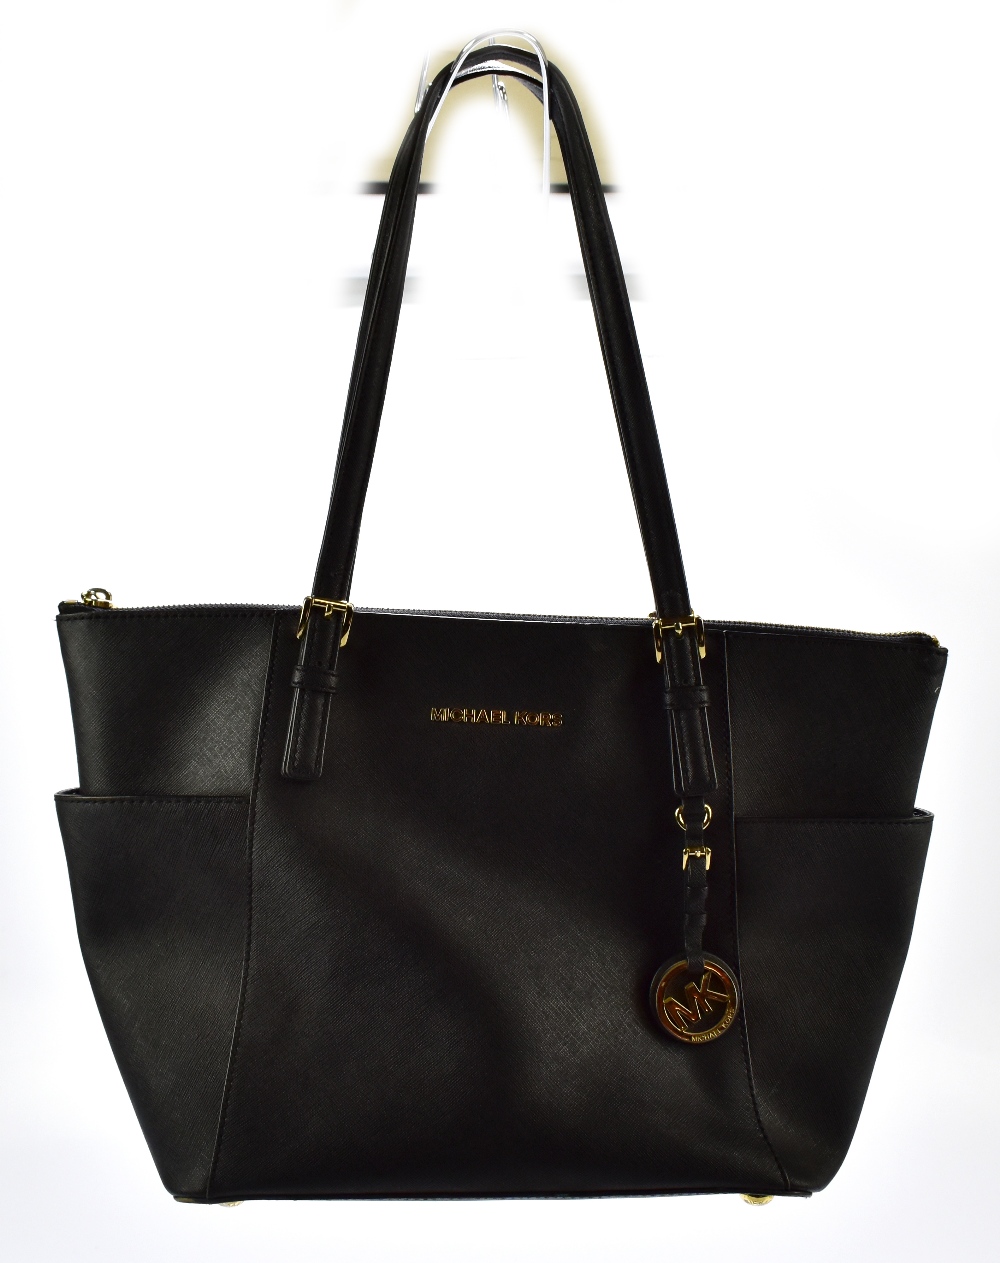 MICHAEL KORS; a black jet set leather tote bag with gold tone hardware base studs, zip, buckles - Image 6 of 7